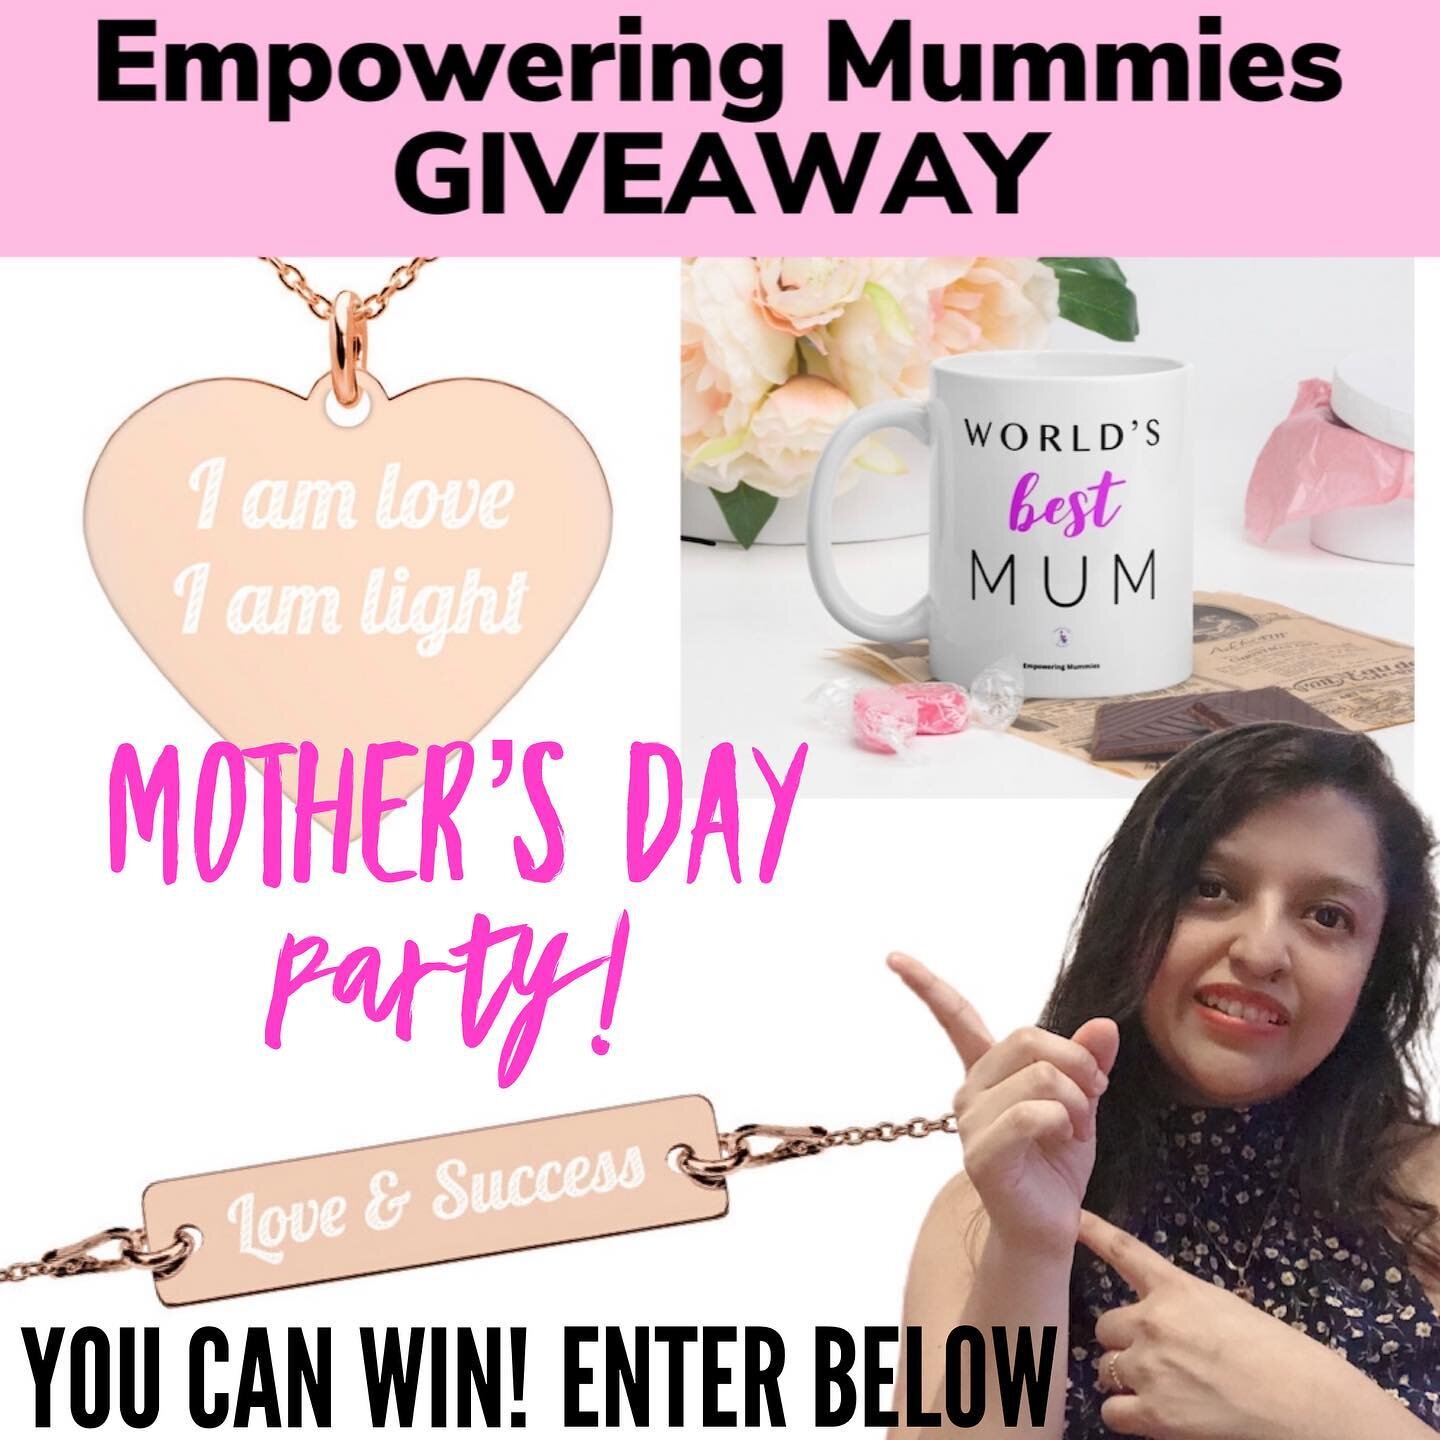 Reward yourself &amp;
Celebrate Mother&rsquo;s Day 💃😍💕
 
Win any of this amazing Miracle tools! 
💥 The bracelet to avoid procrastination and never give up until achieve success.
💥The necklace to overcome obstacles in life and to remember that yo